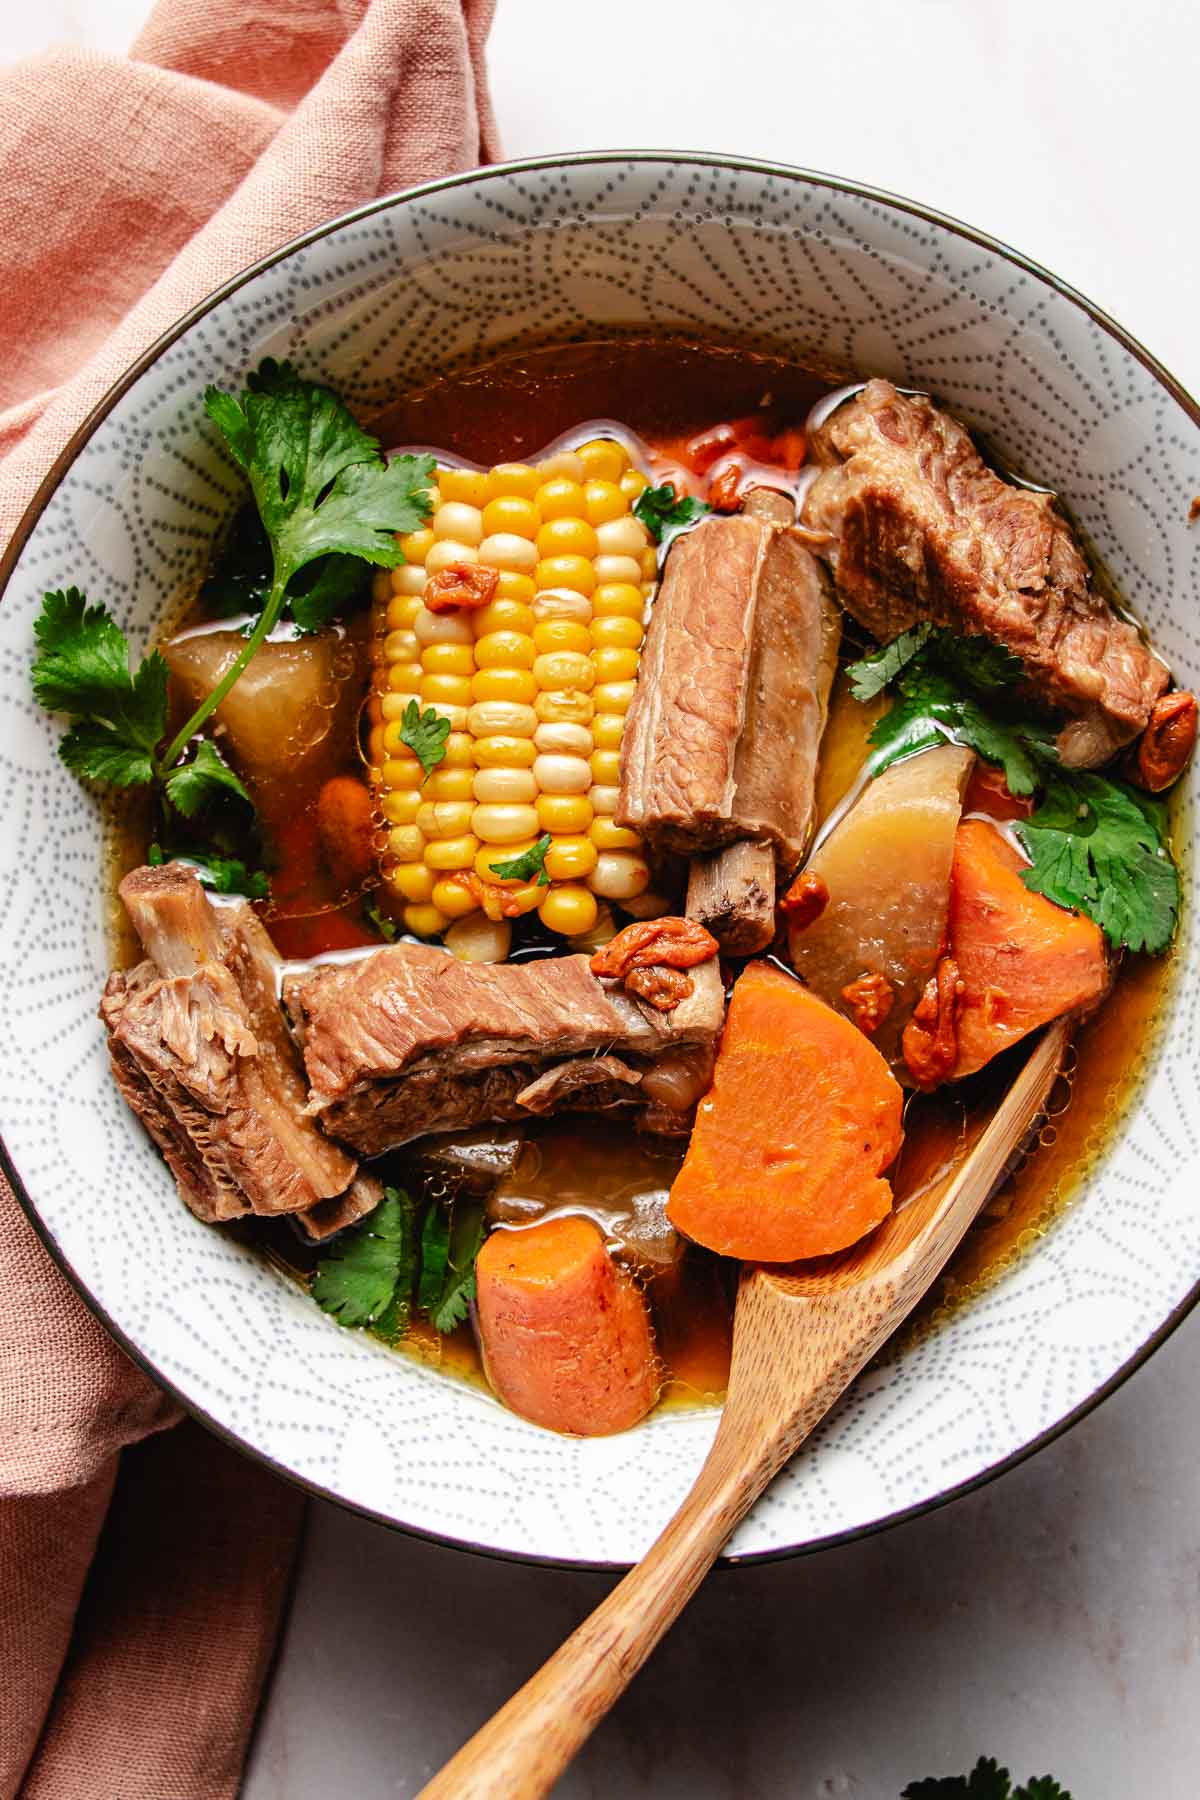 Feature image shows tender pork ribs soup simmered with daikon radish, carrots, and corn and served in a white soup bowl.